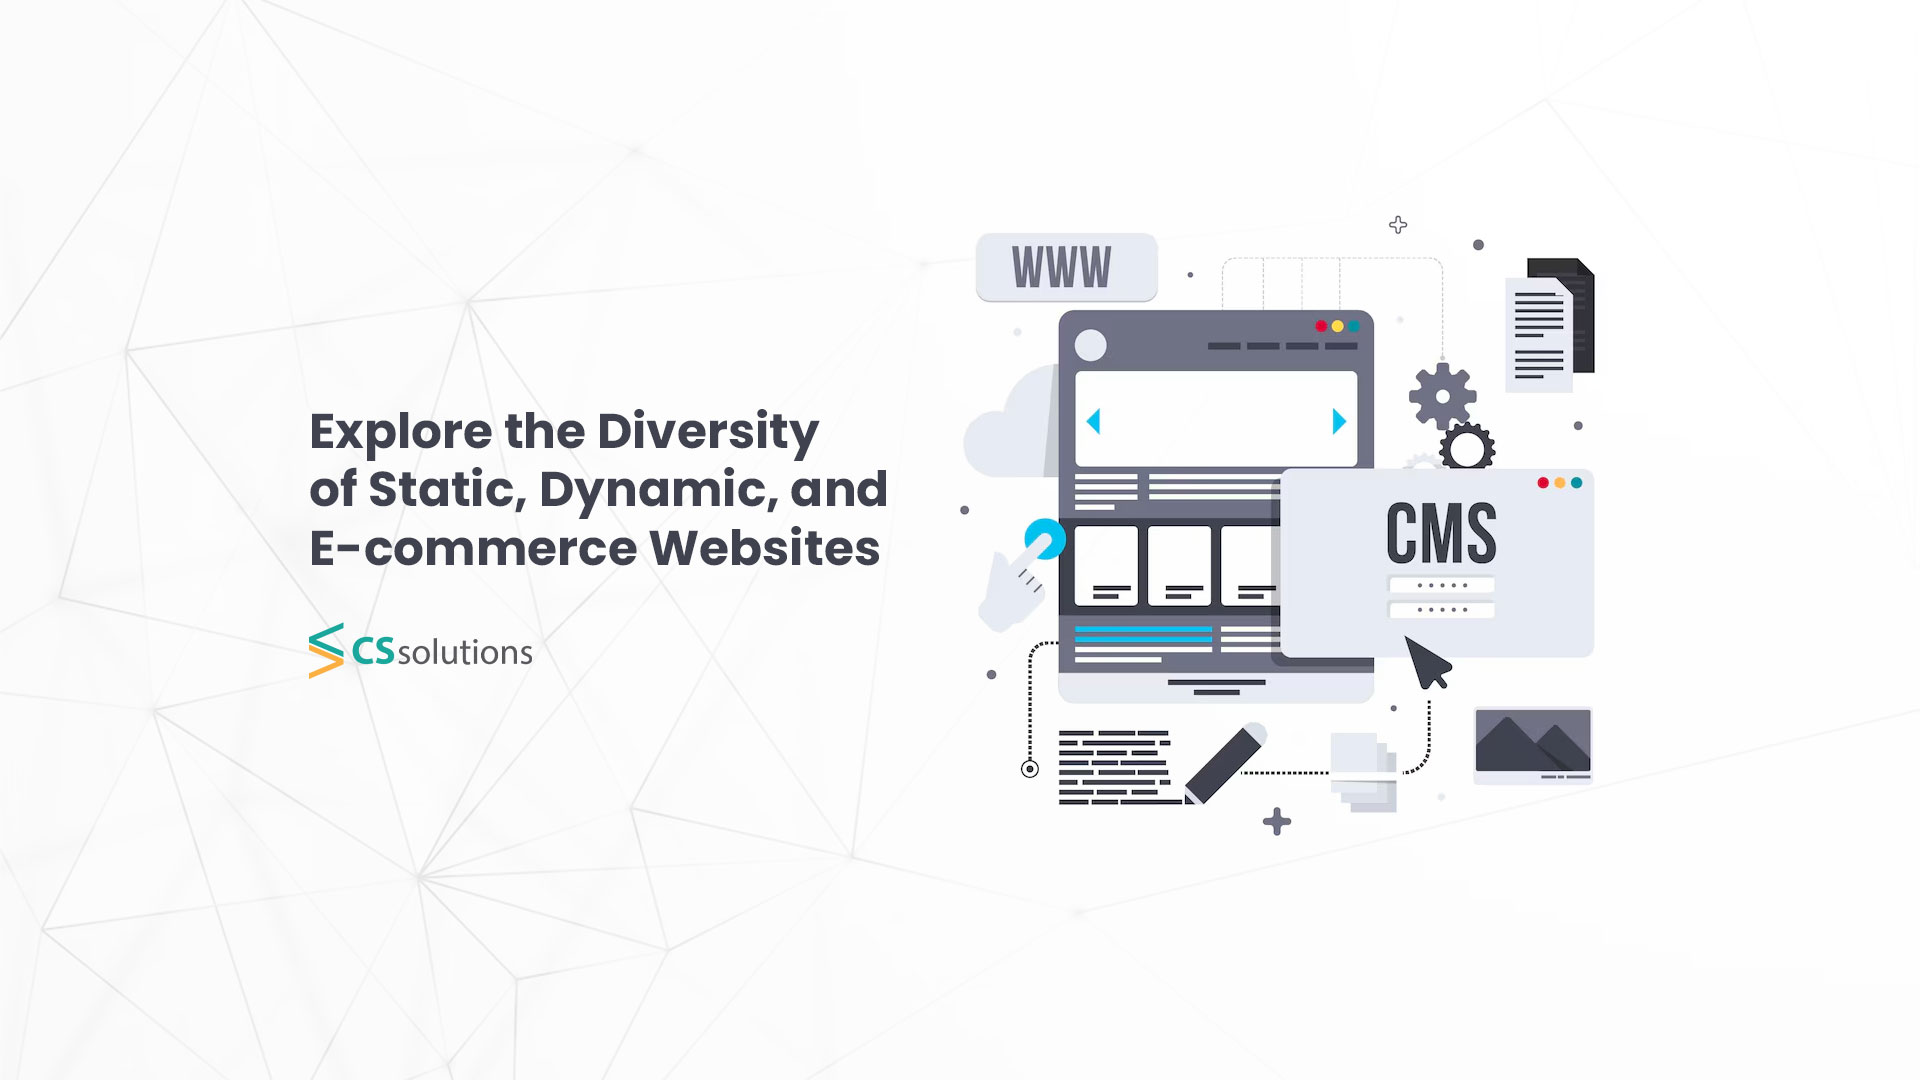 Explore the Diversity of Static, Dynamic, and E-commerce Websites